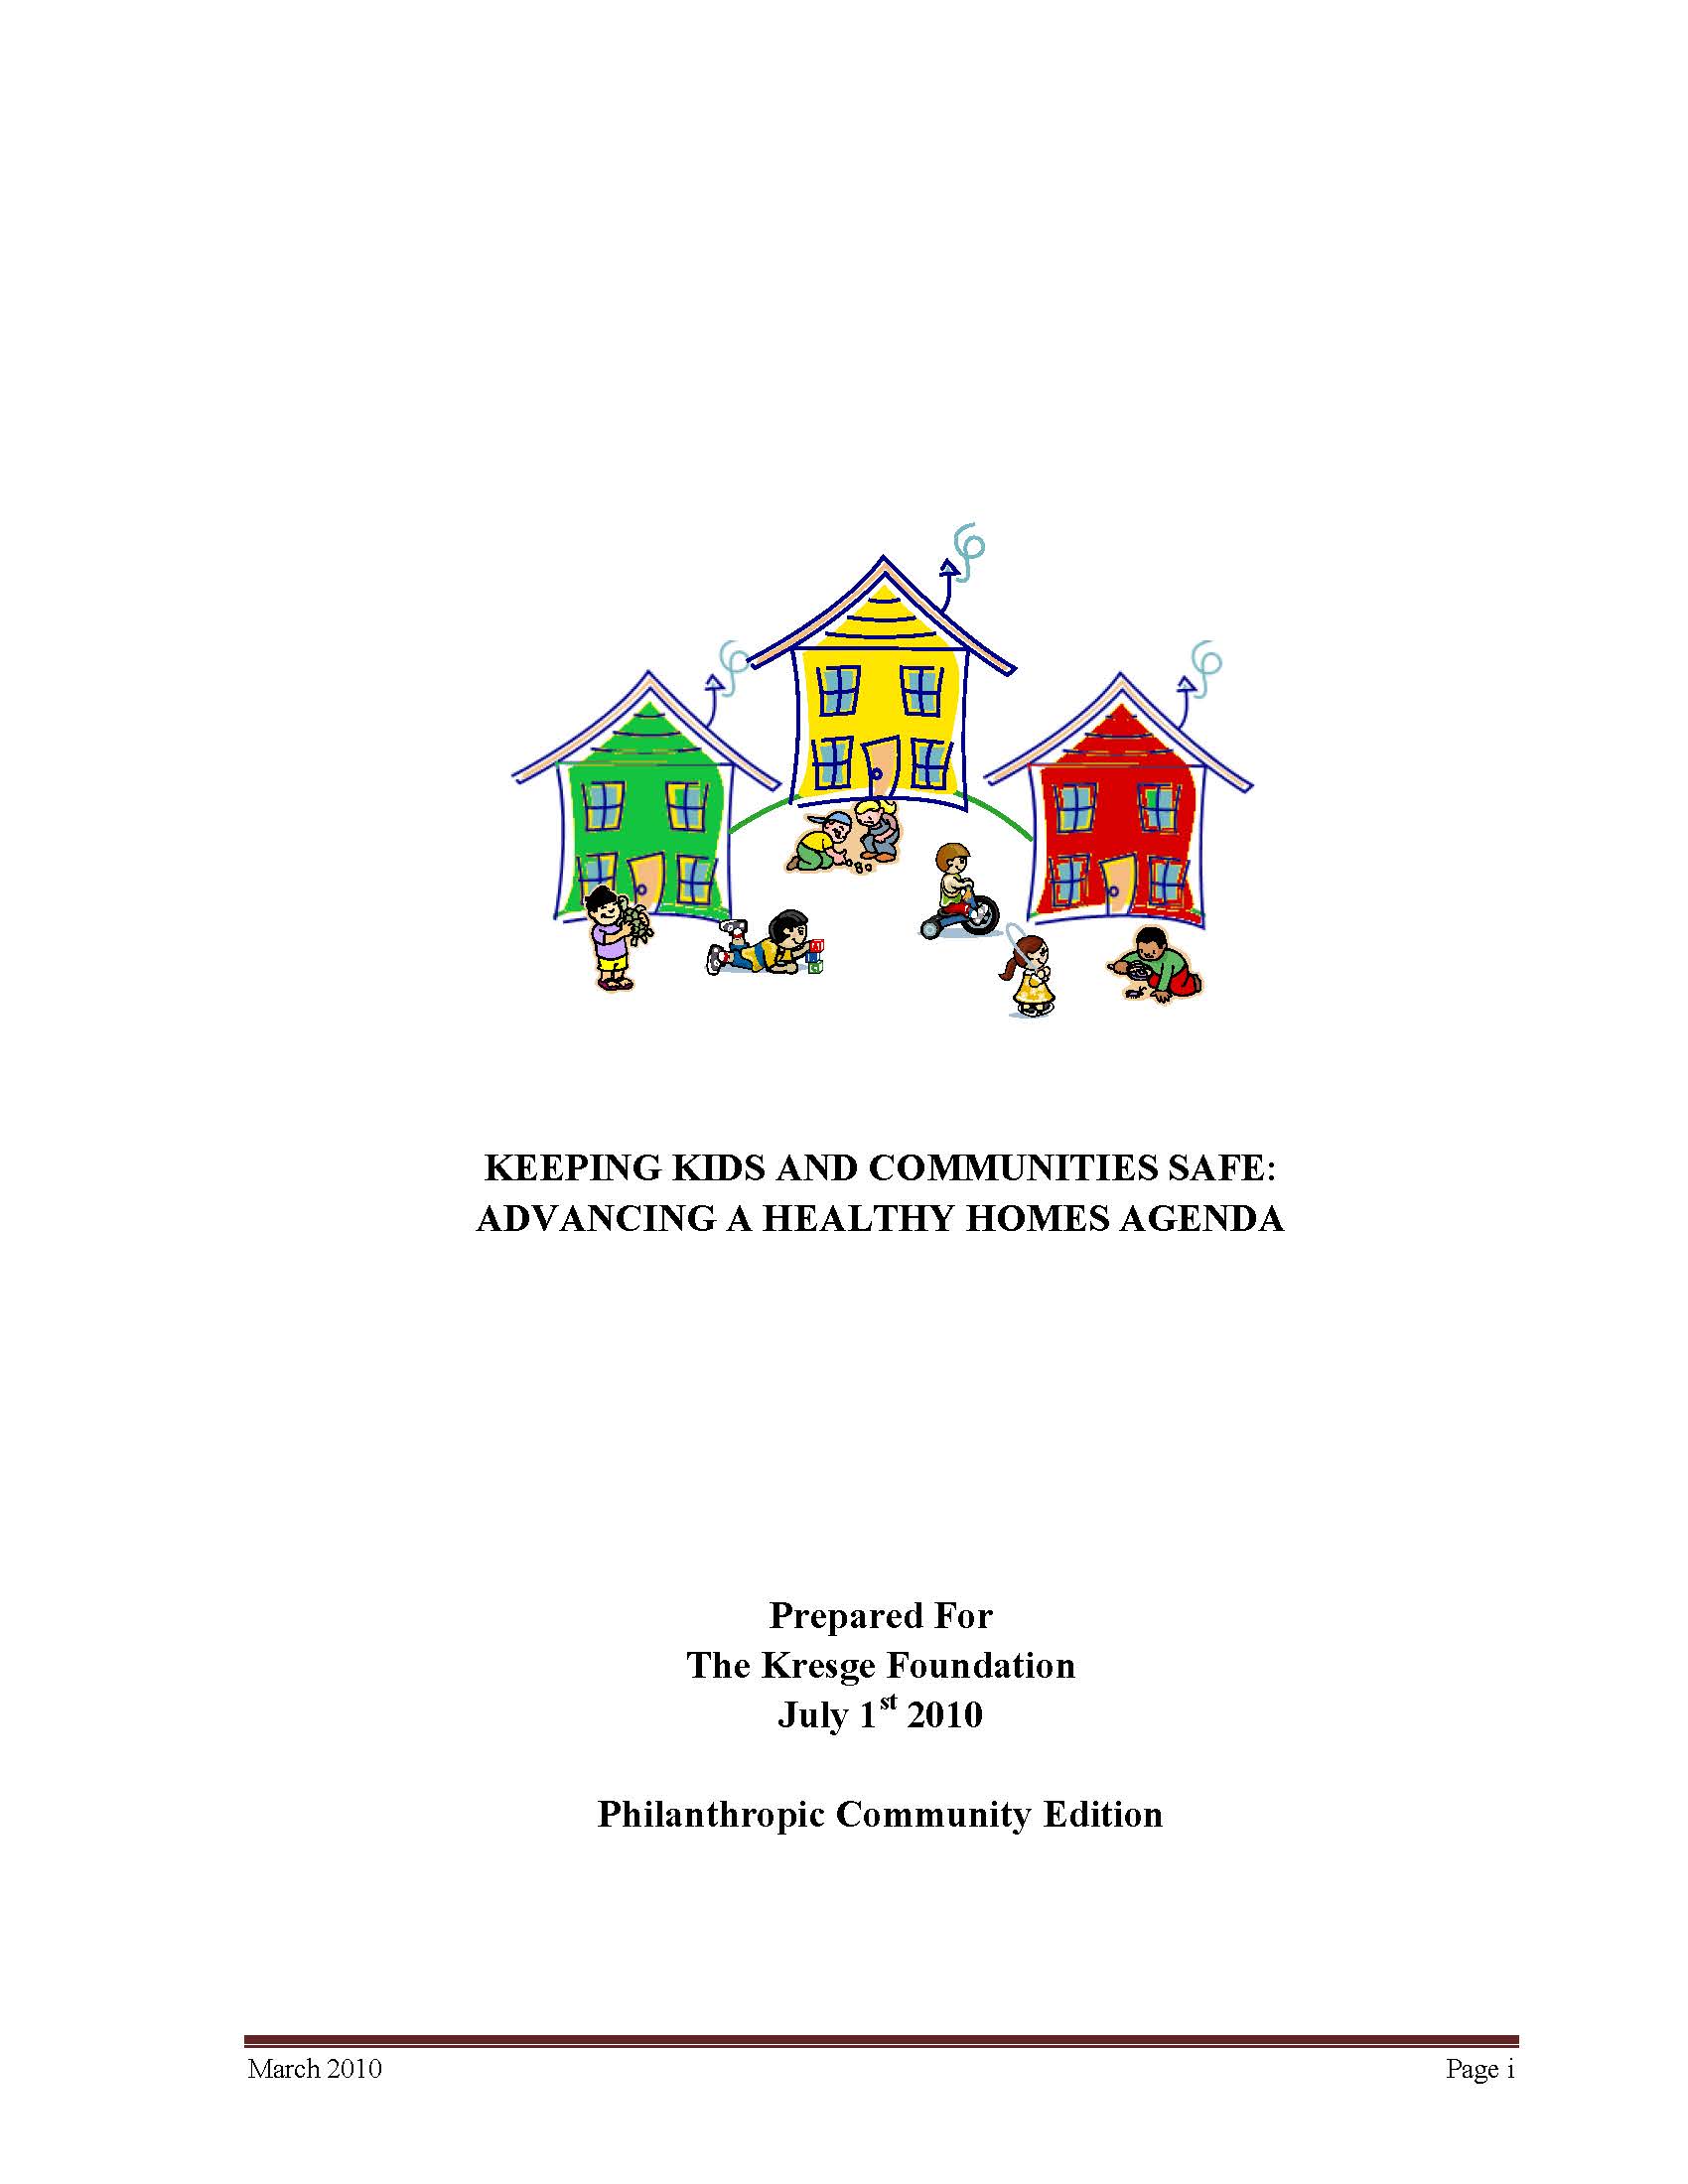 Keeping Kids and Communities Safe: Advancing a Healthy Homes Agenda